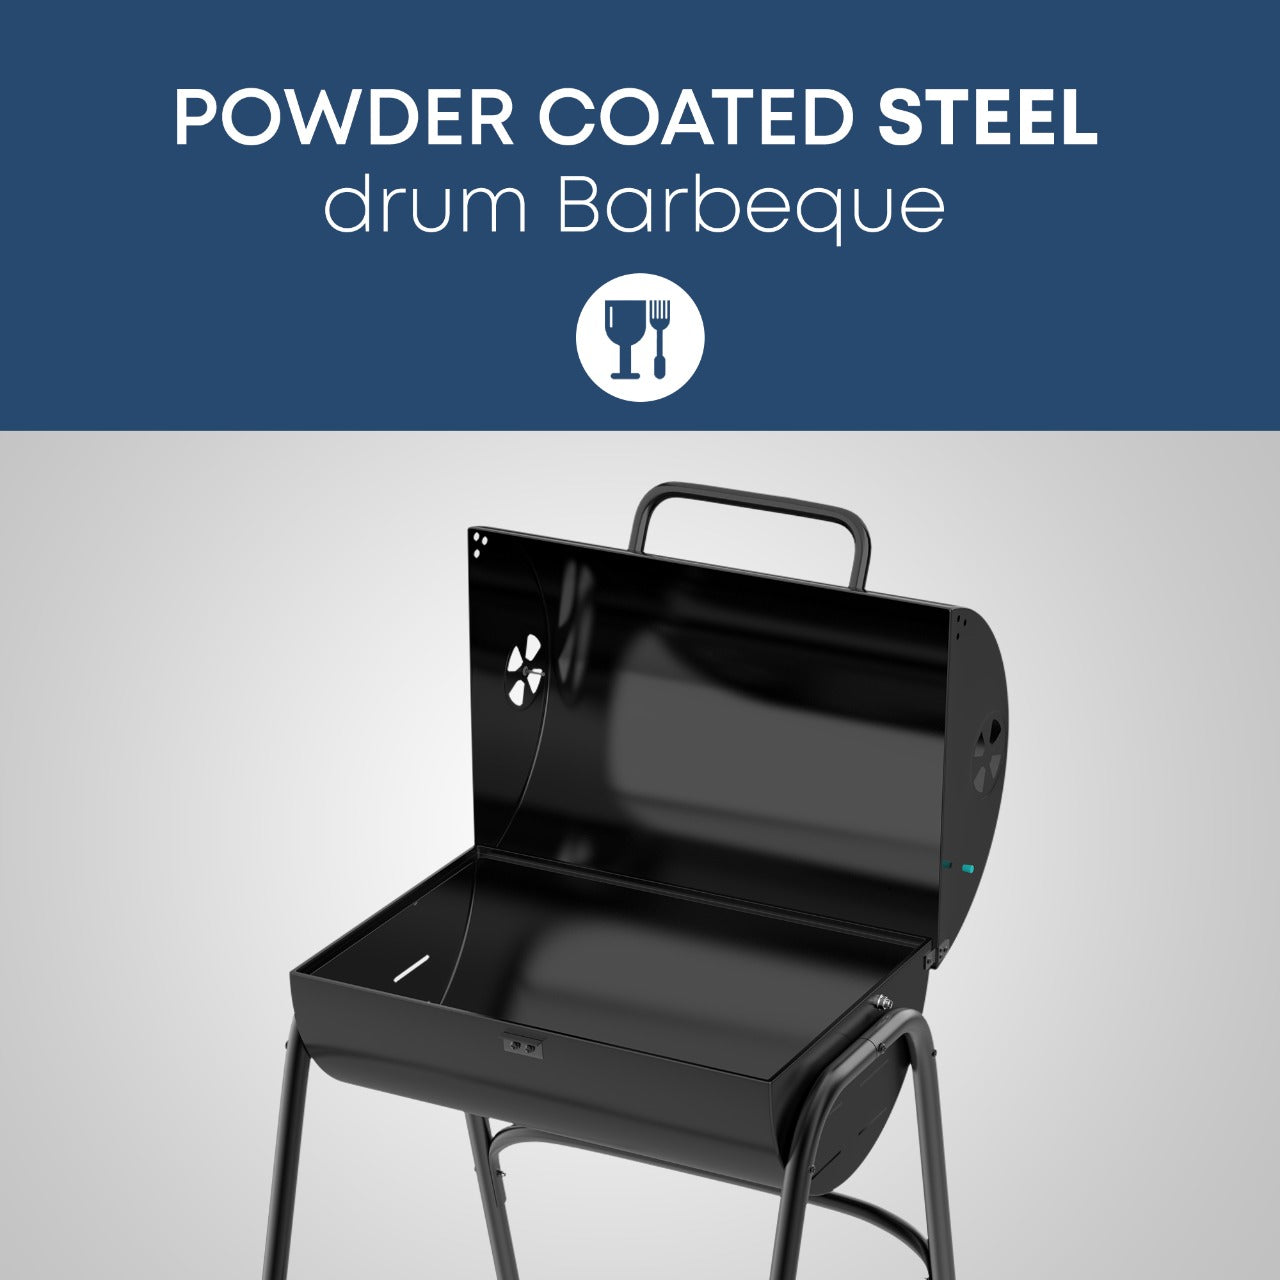 Charcoal Barbeque Grill set | Anti-Rust, Anti-Deformation & Scratch Resistant